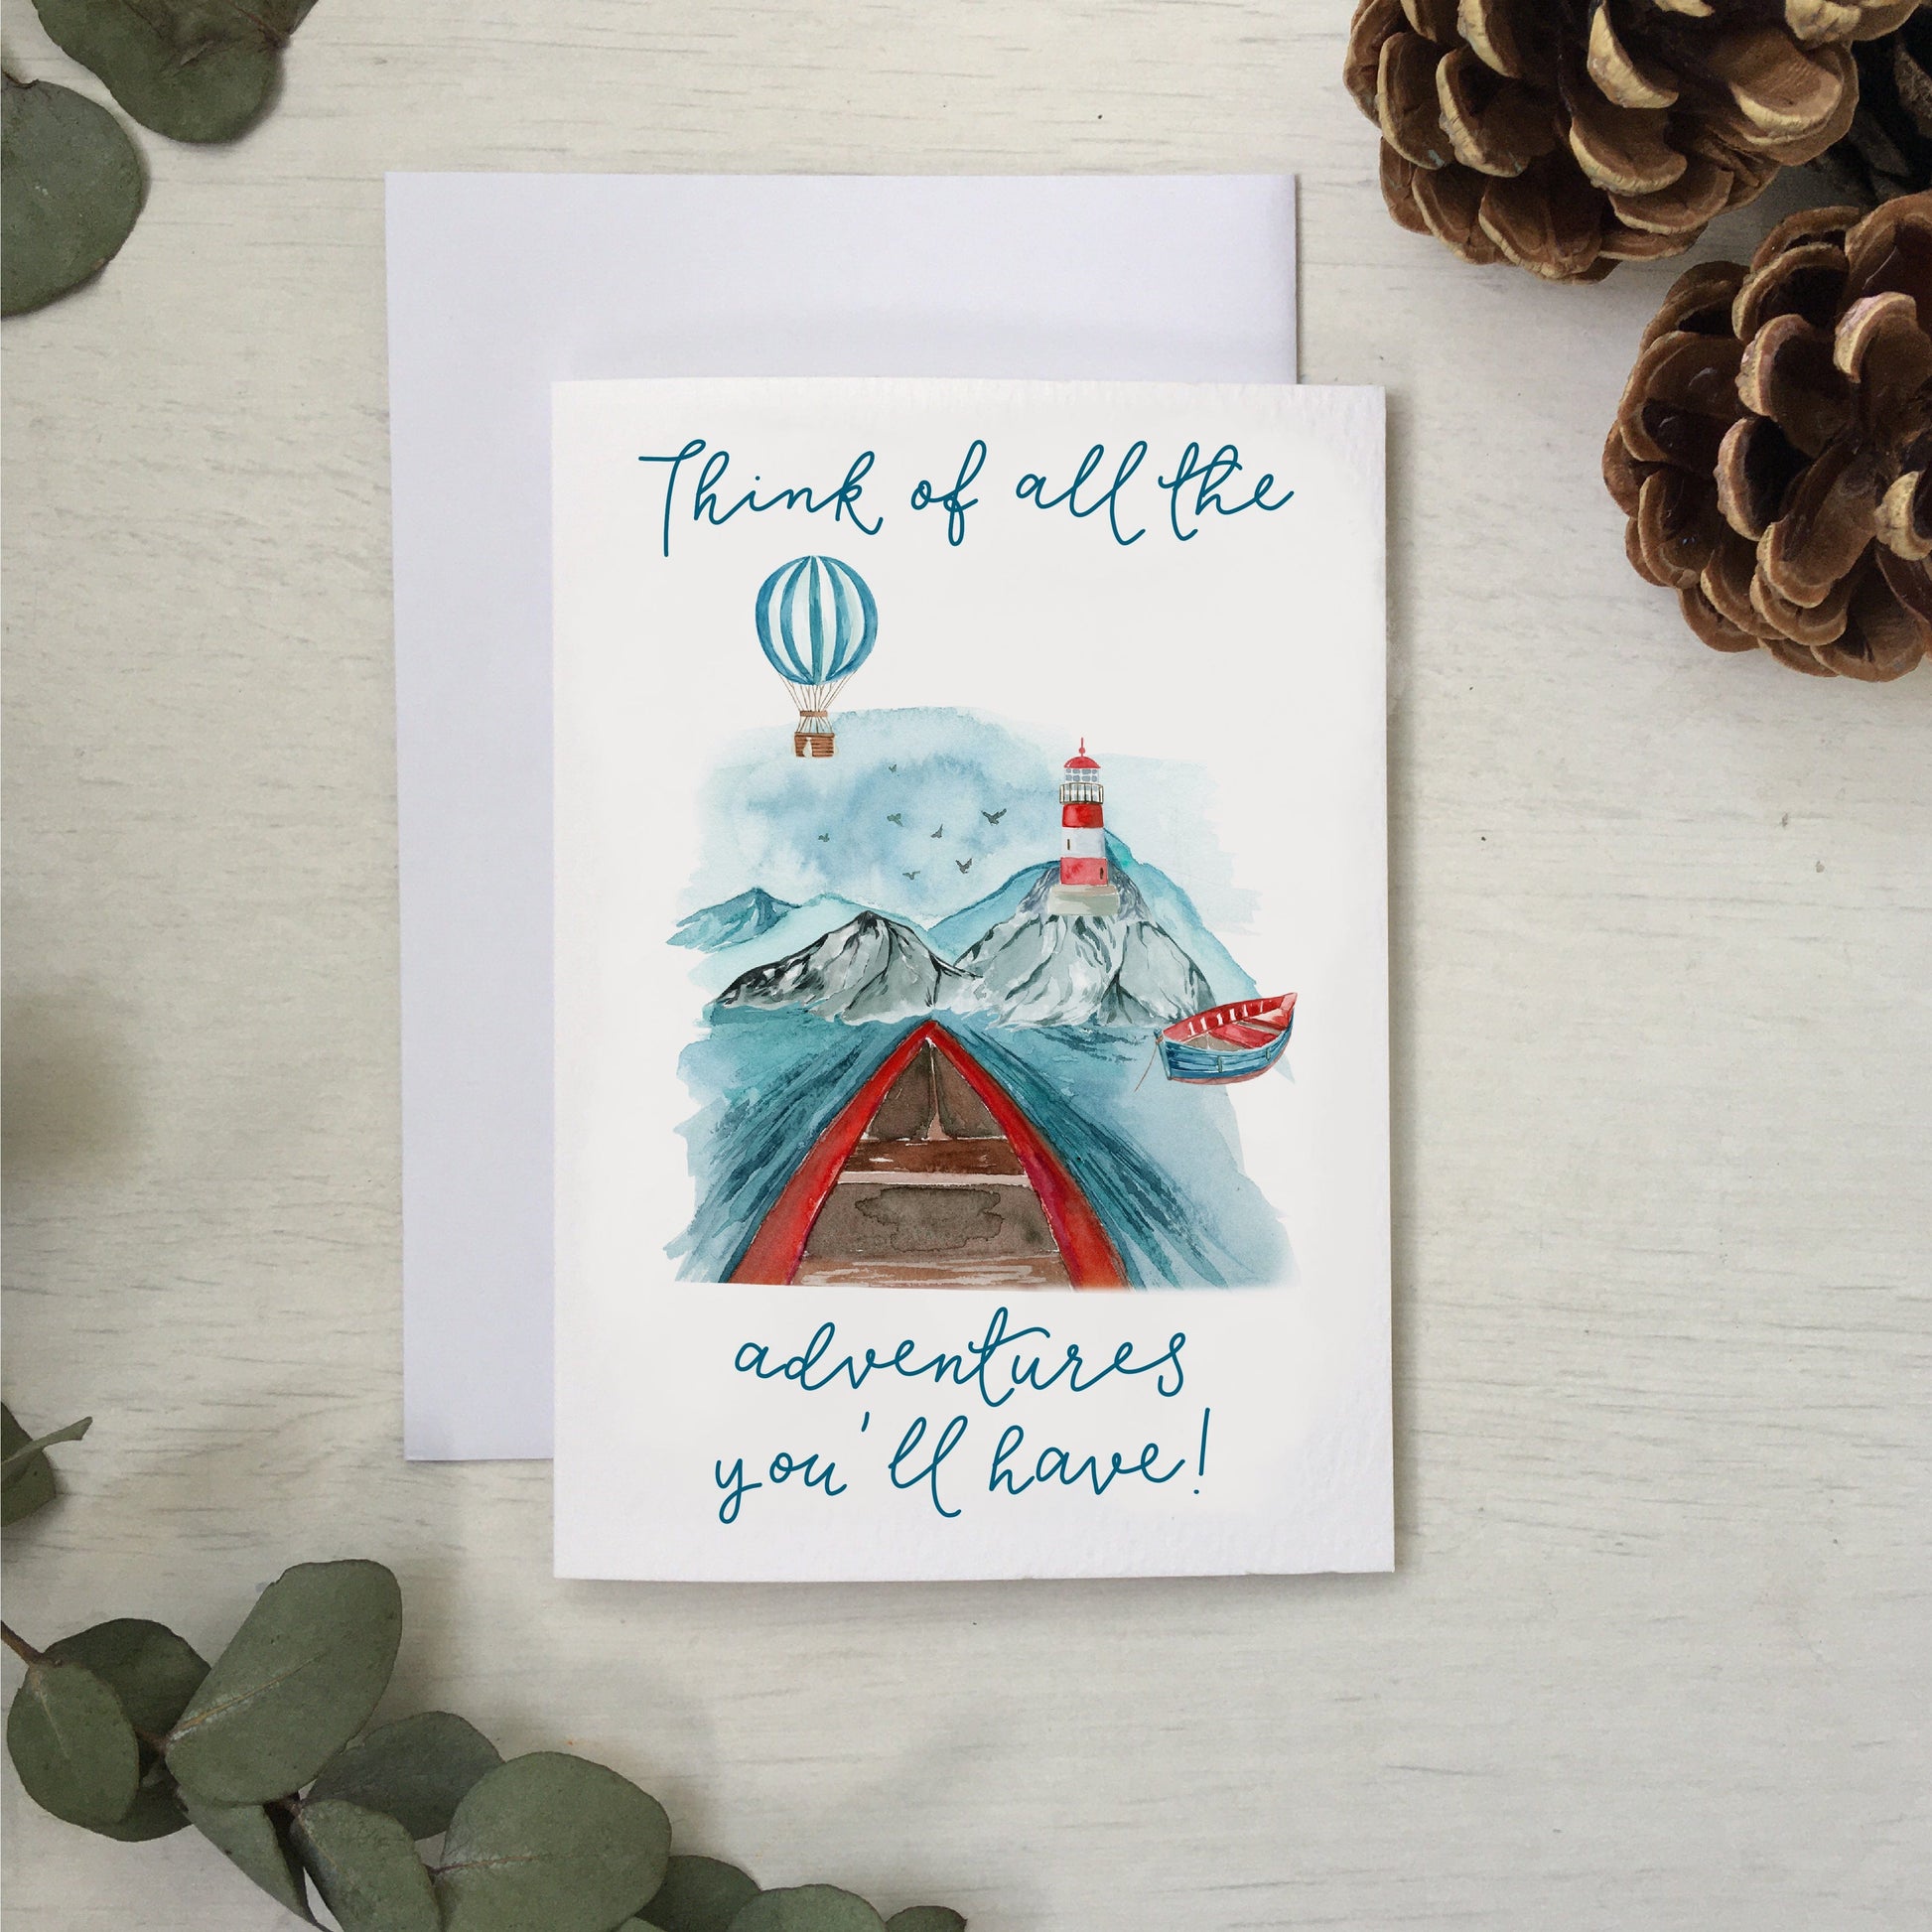 And Hope Designs Think of all the adventures you’ll have water card